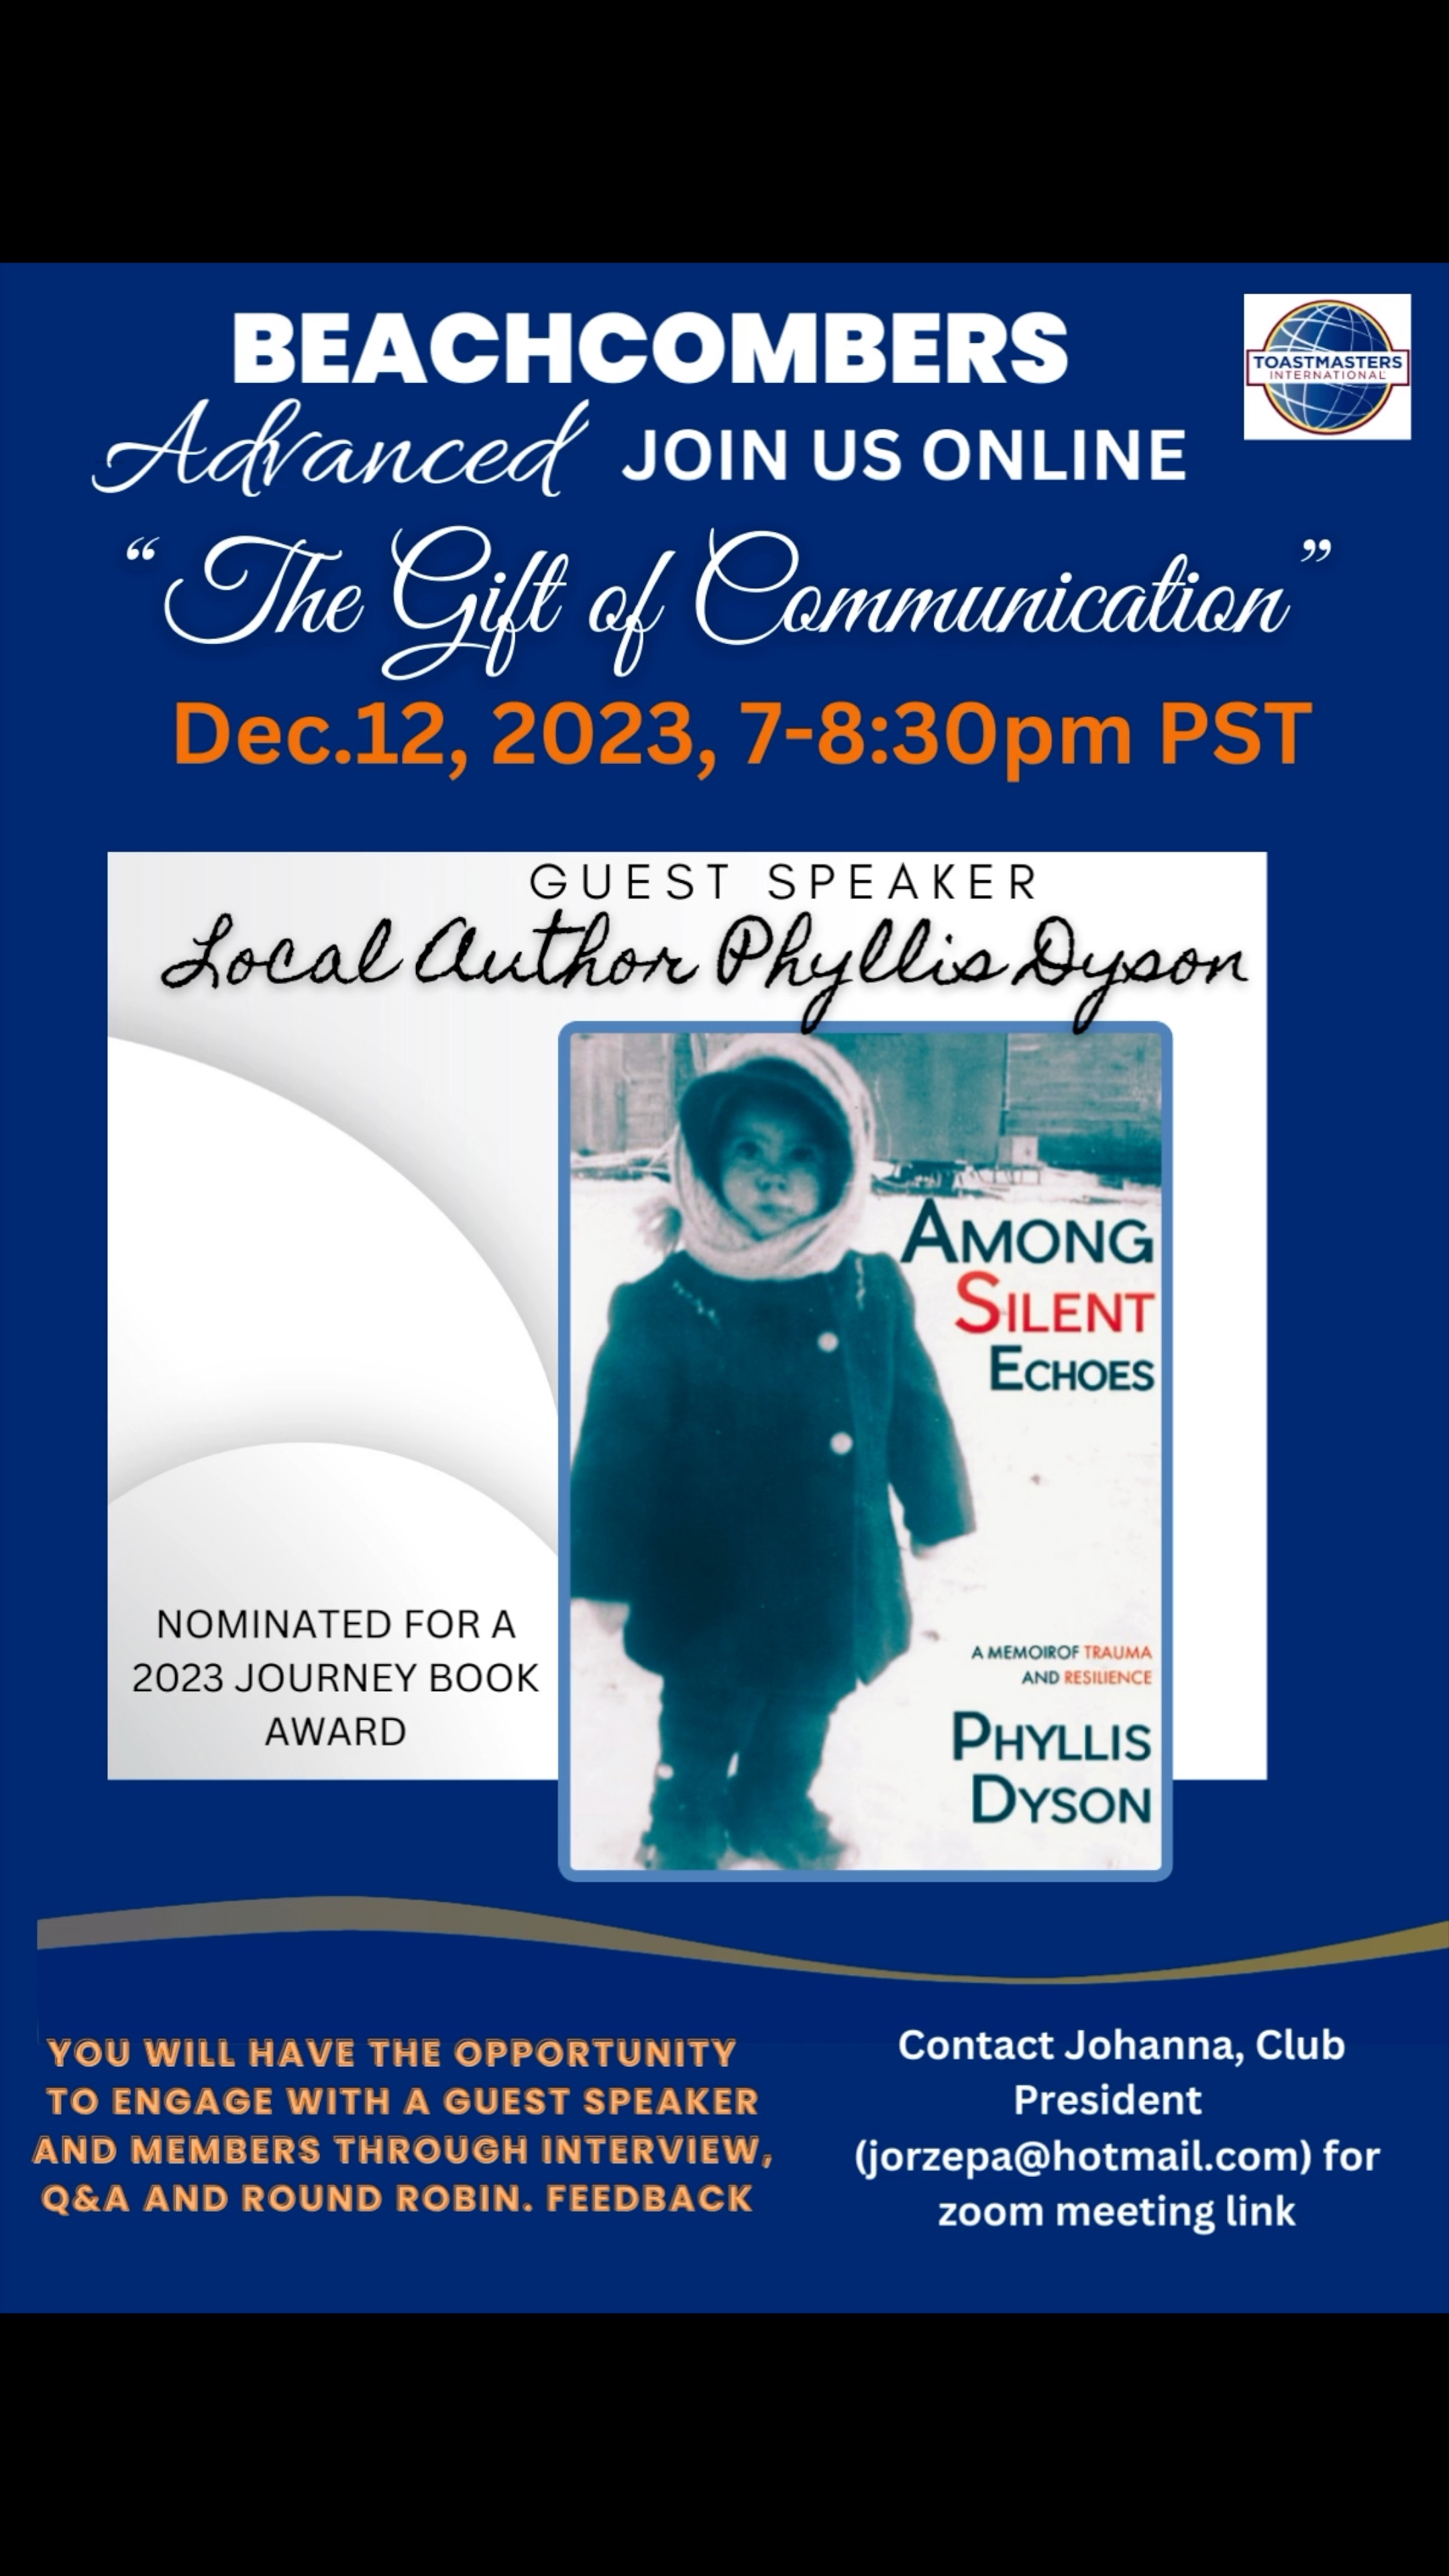 Share the gift of communication with us!